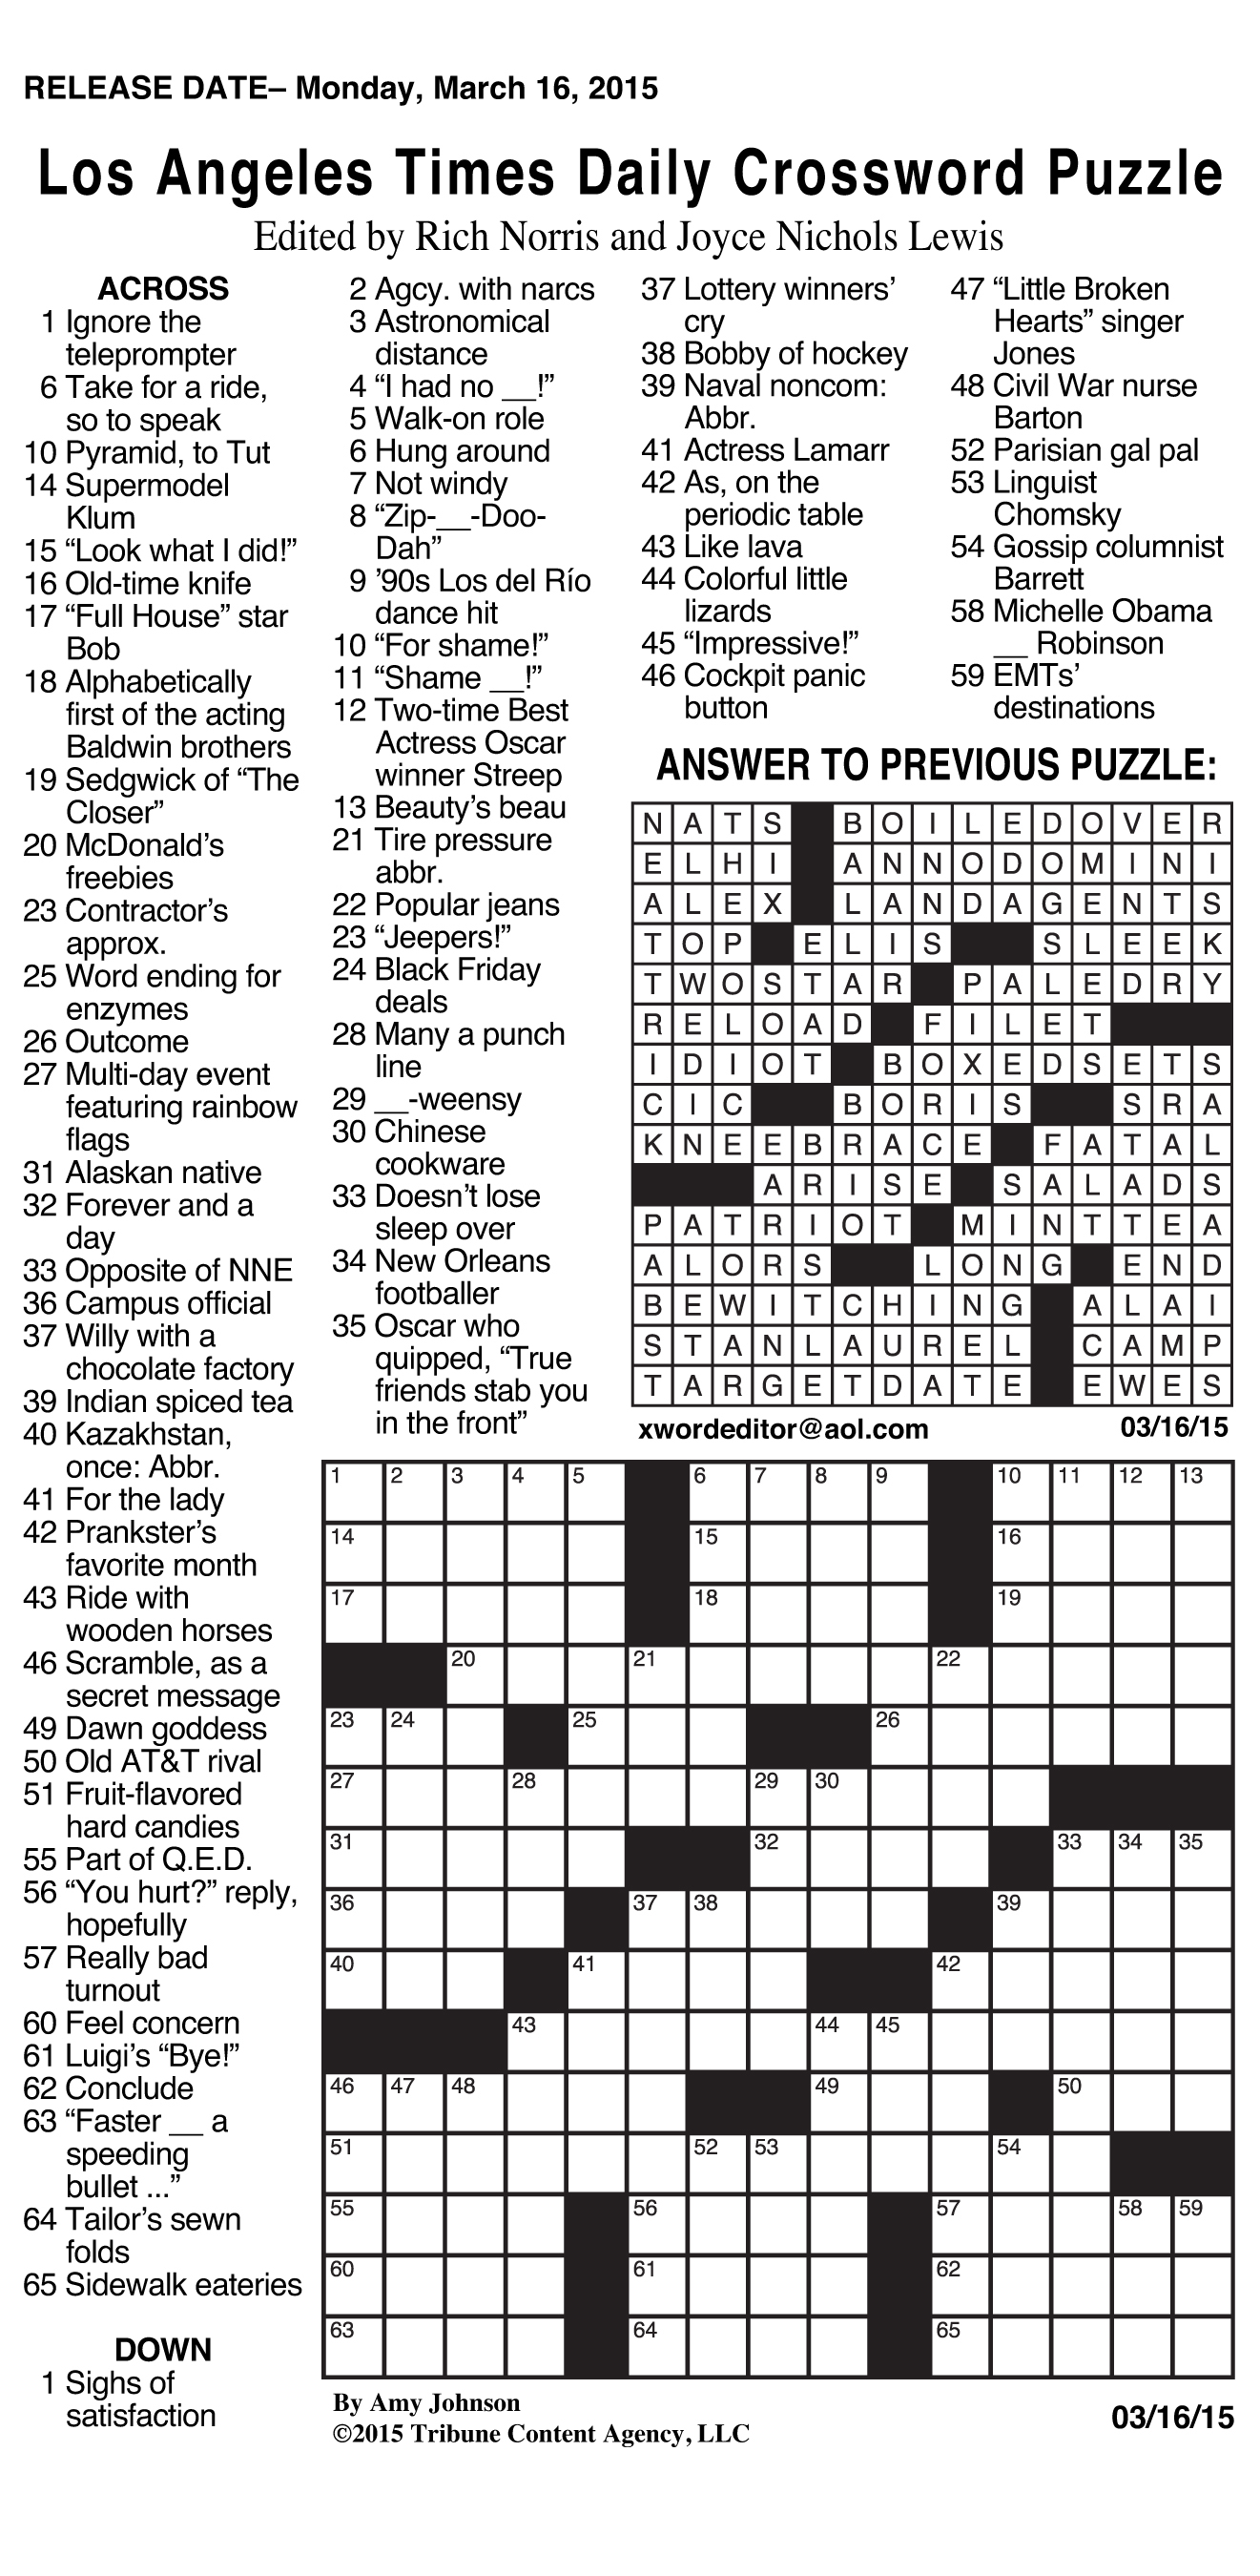 Sample Of Los Angeles Times Daily Crossword Puzzle | Tribune Content - Printable Newspaper Puzzles